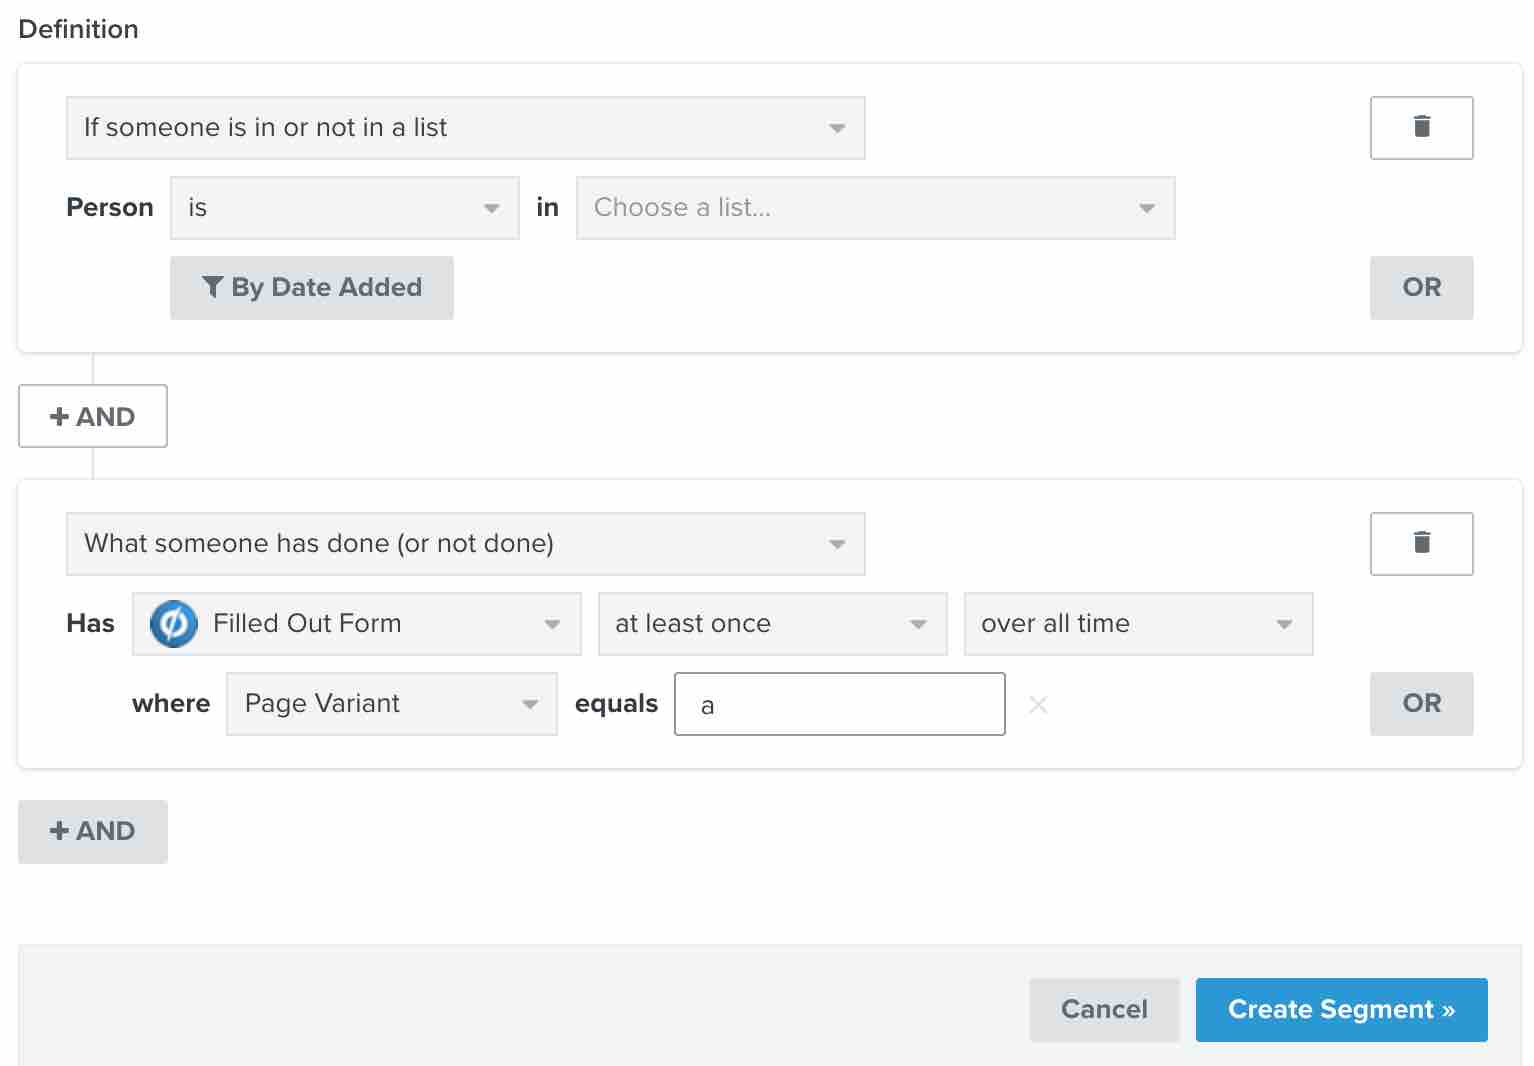 Segment in segment builder in Klaviyo for someone who has filled out a form with page variant a